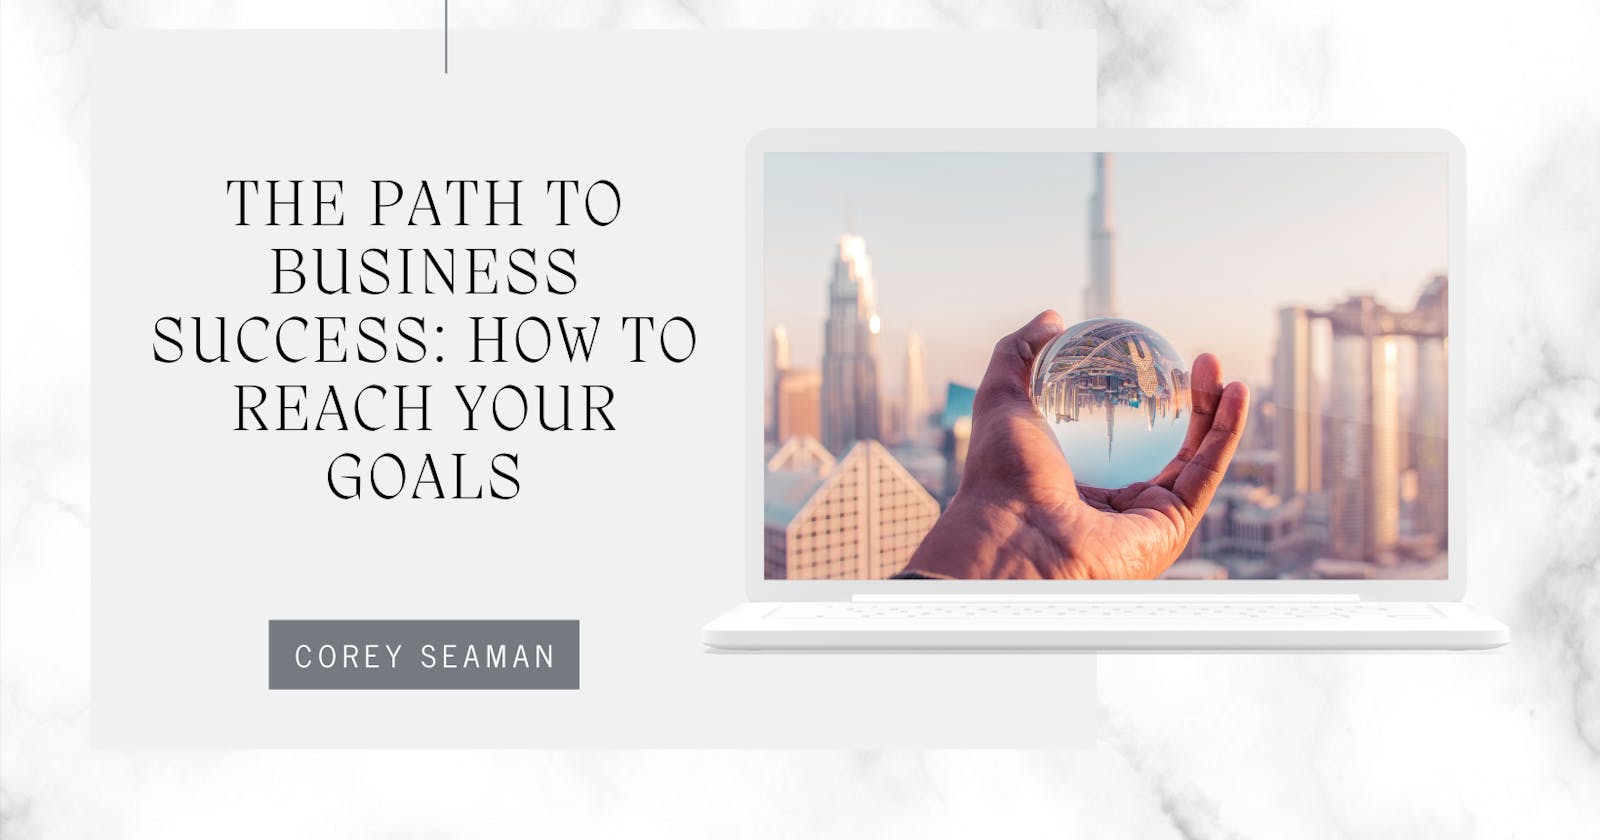 Corey Seaman | The Path to Business Success: How to Reach Your Goals